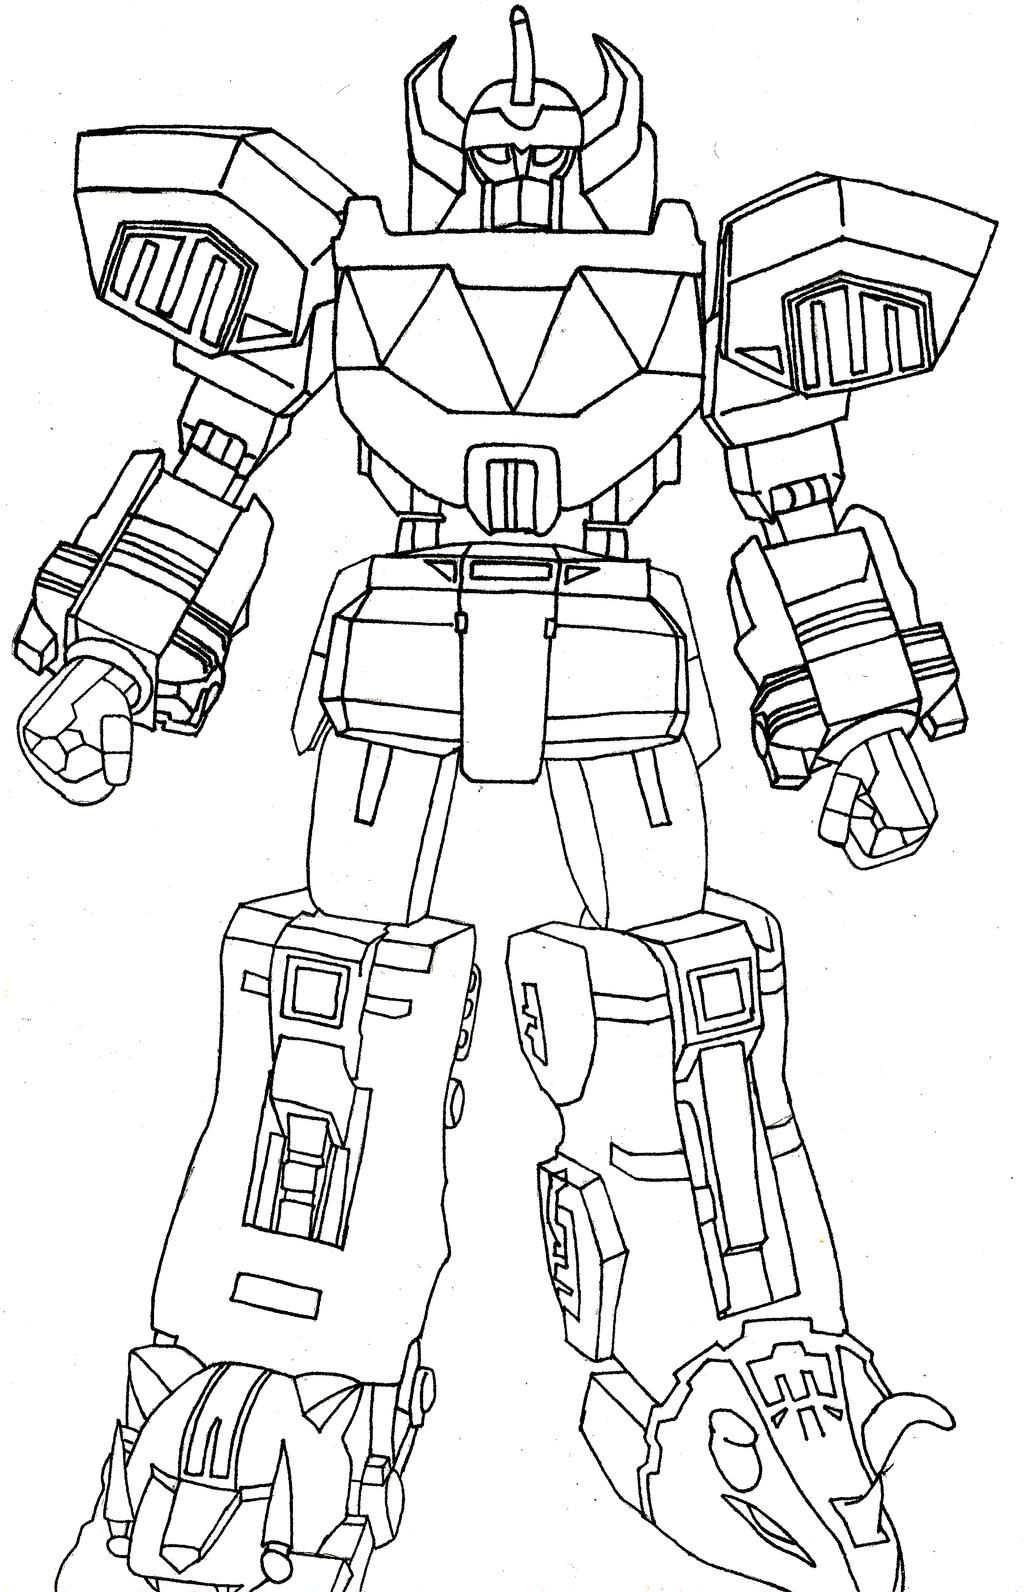 The Megazord By Sparten69R On Deviantart  Power Rangers tout Power Rangers Coloring Pages